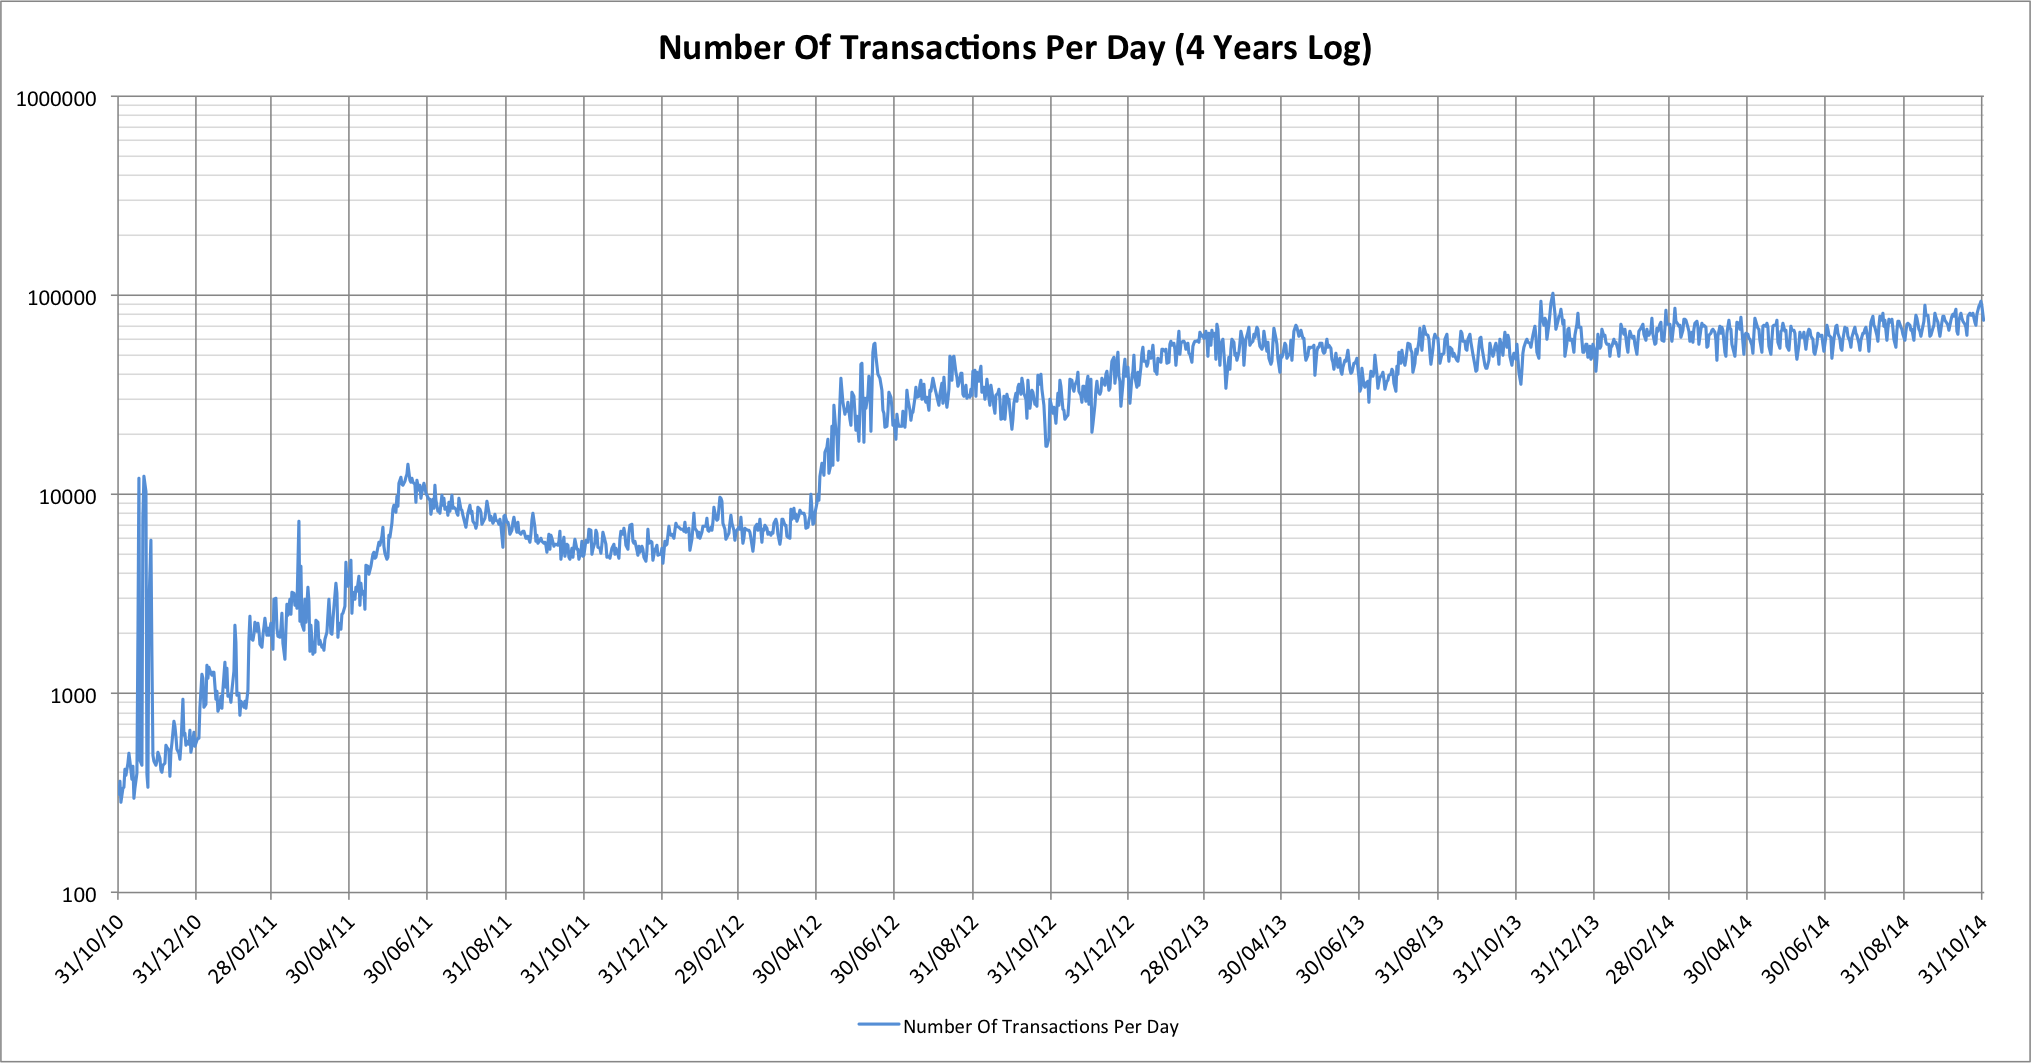 Number of Bitcoin transactions per day (log chart)